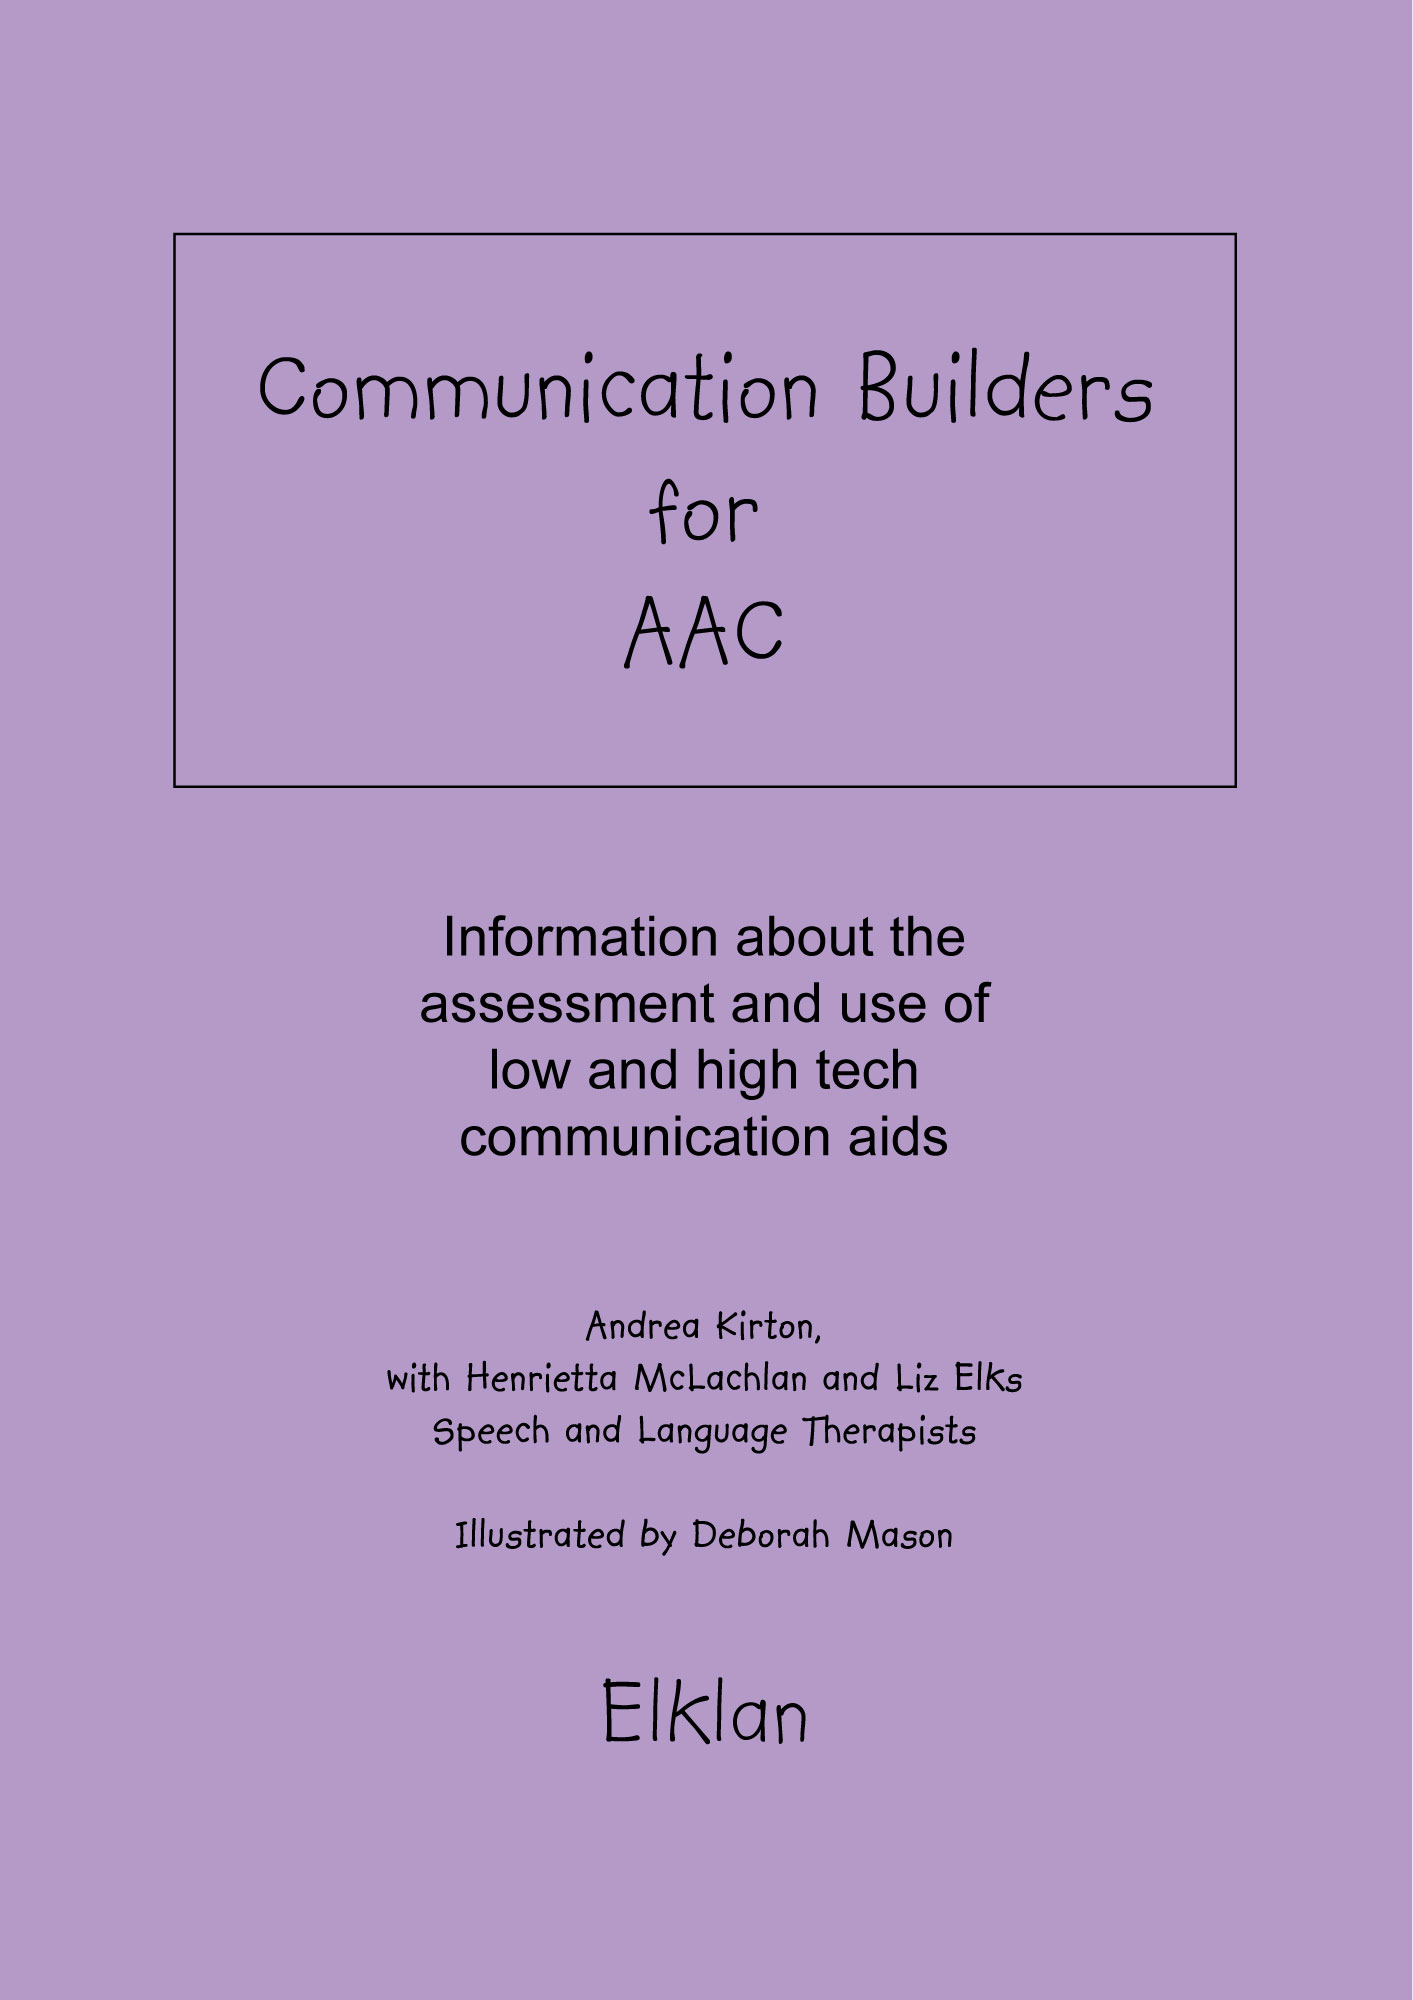 Communication Builders for AAC paperback - previous (2013) version